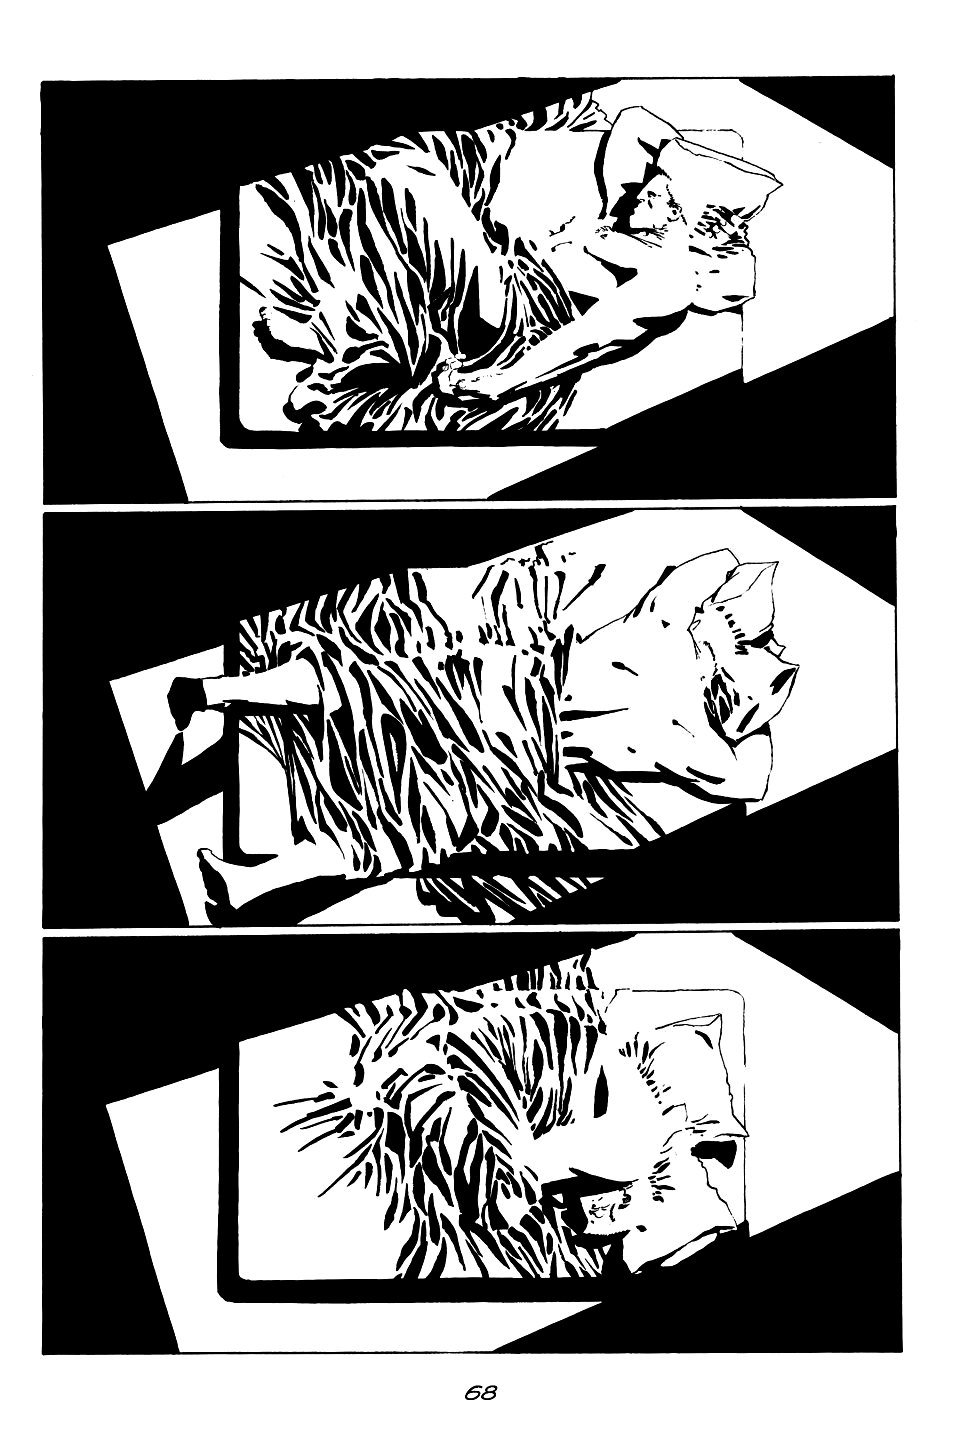 page 68 of sin city 1 the hard goodbye